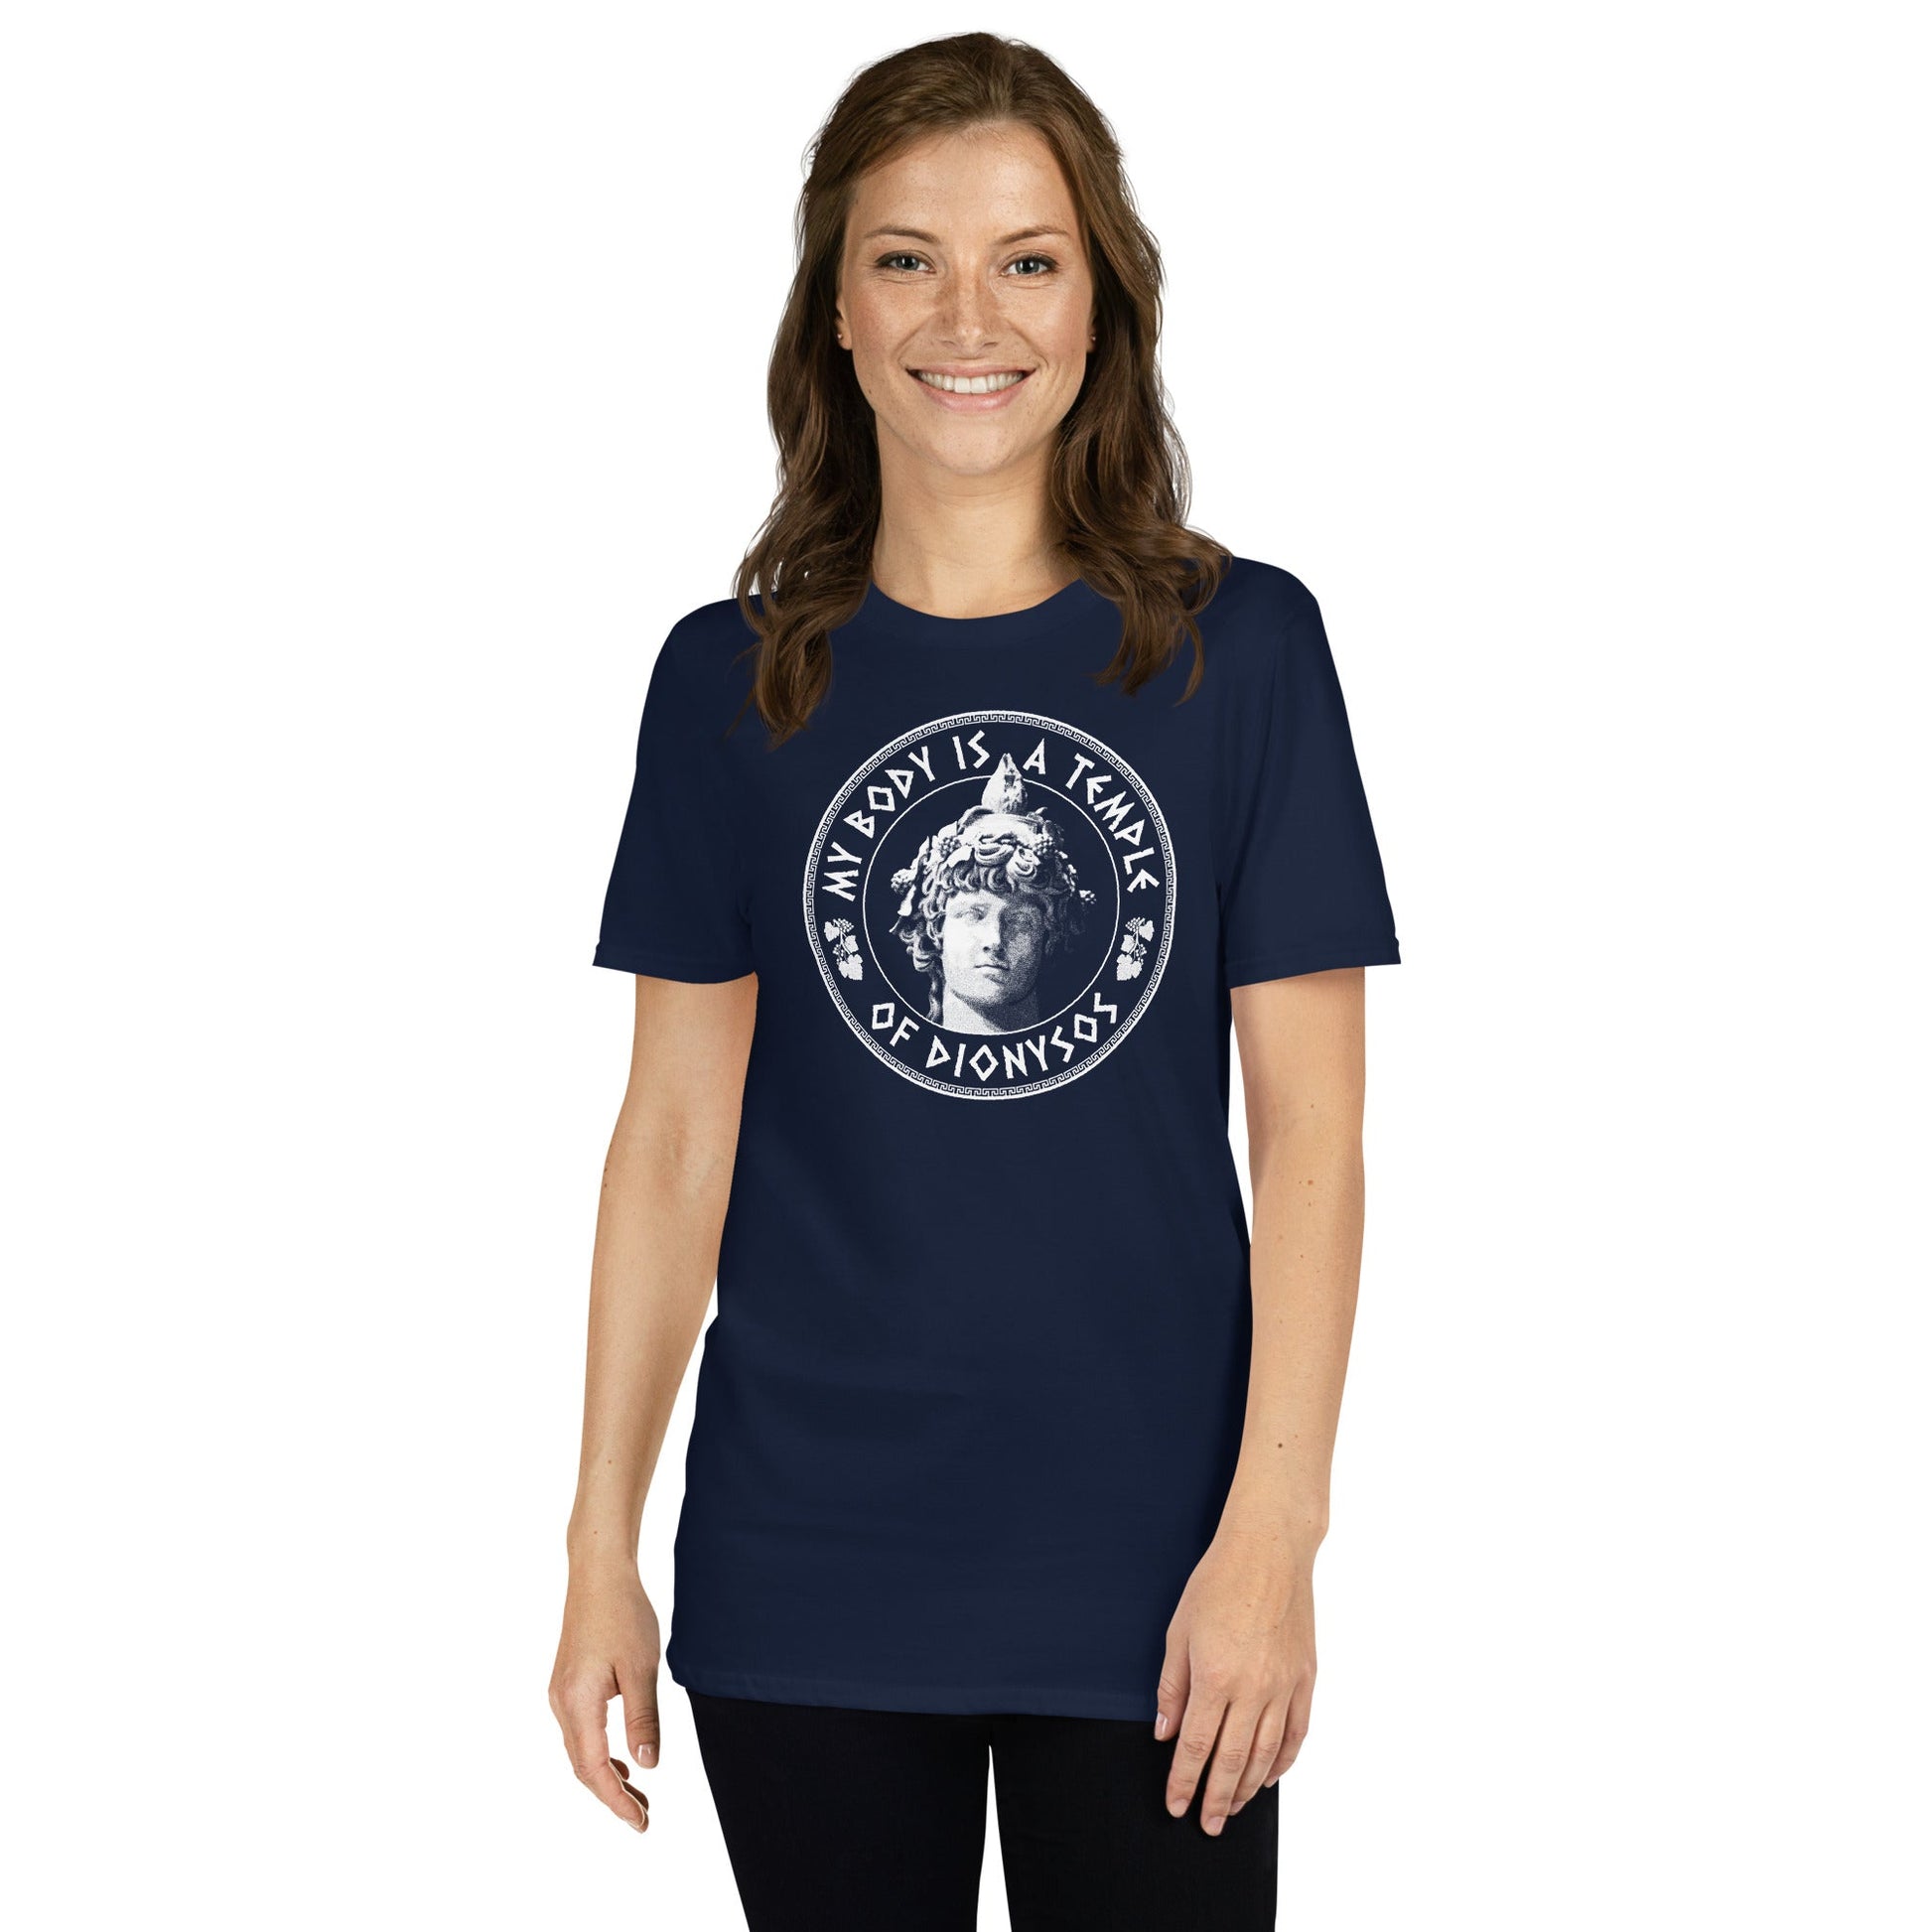 My Body Is A Temple Of Dionysos - Premium T-Shirt